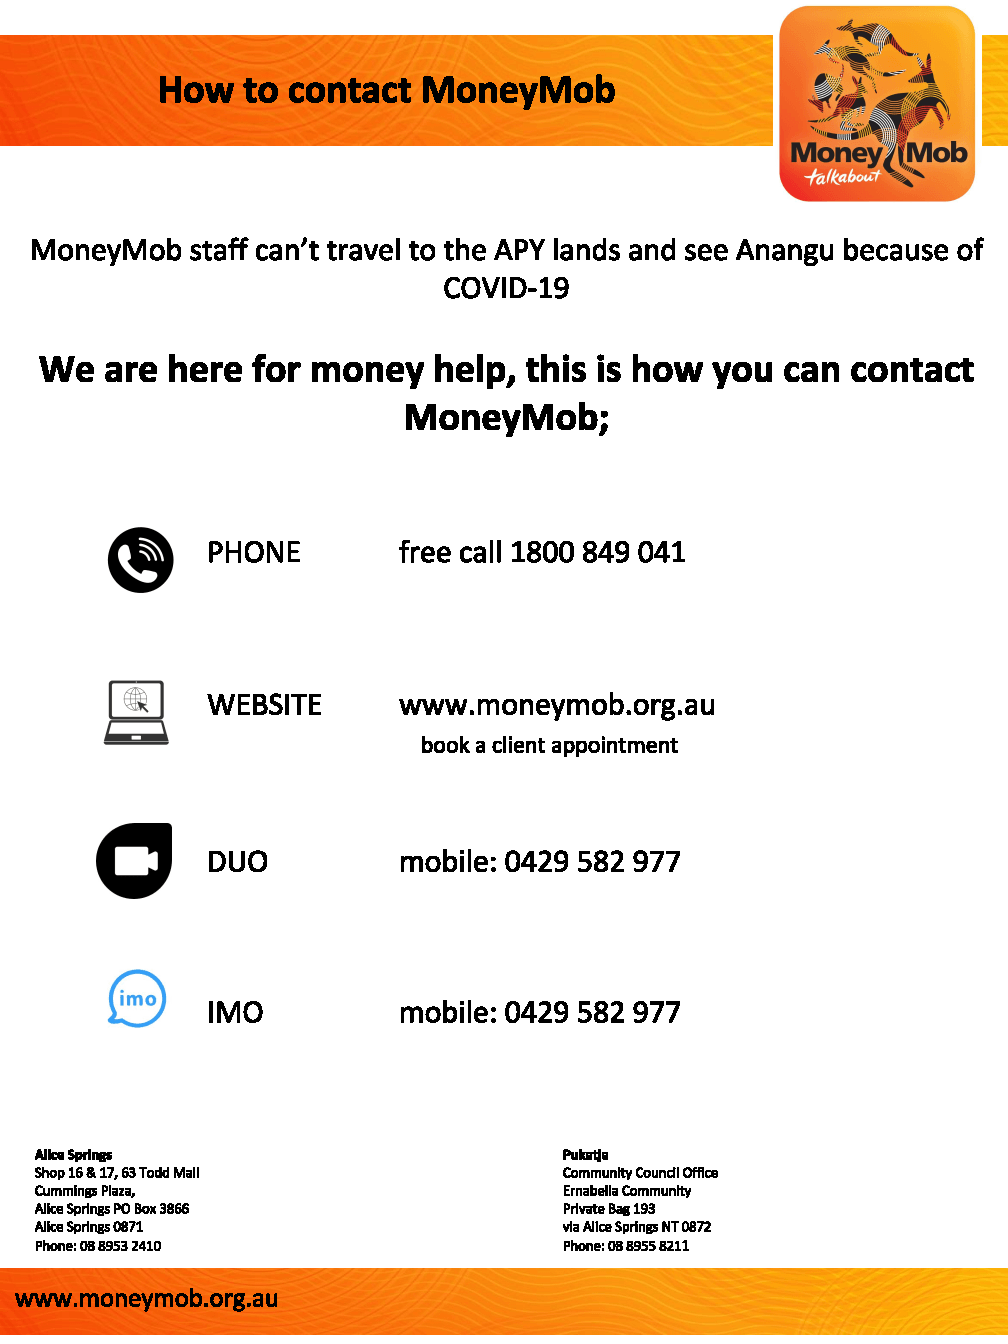 How to contact MoneyMob poster